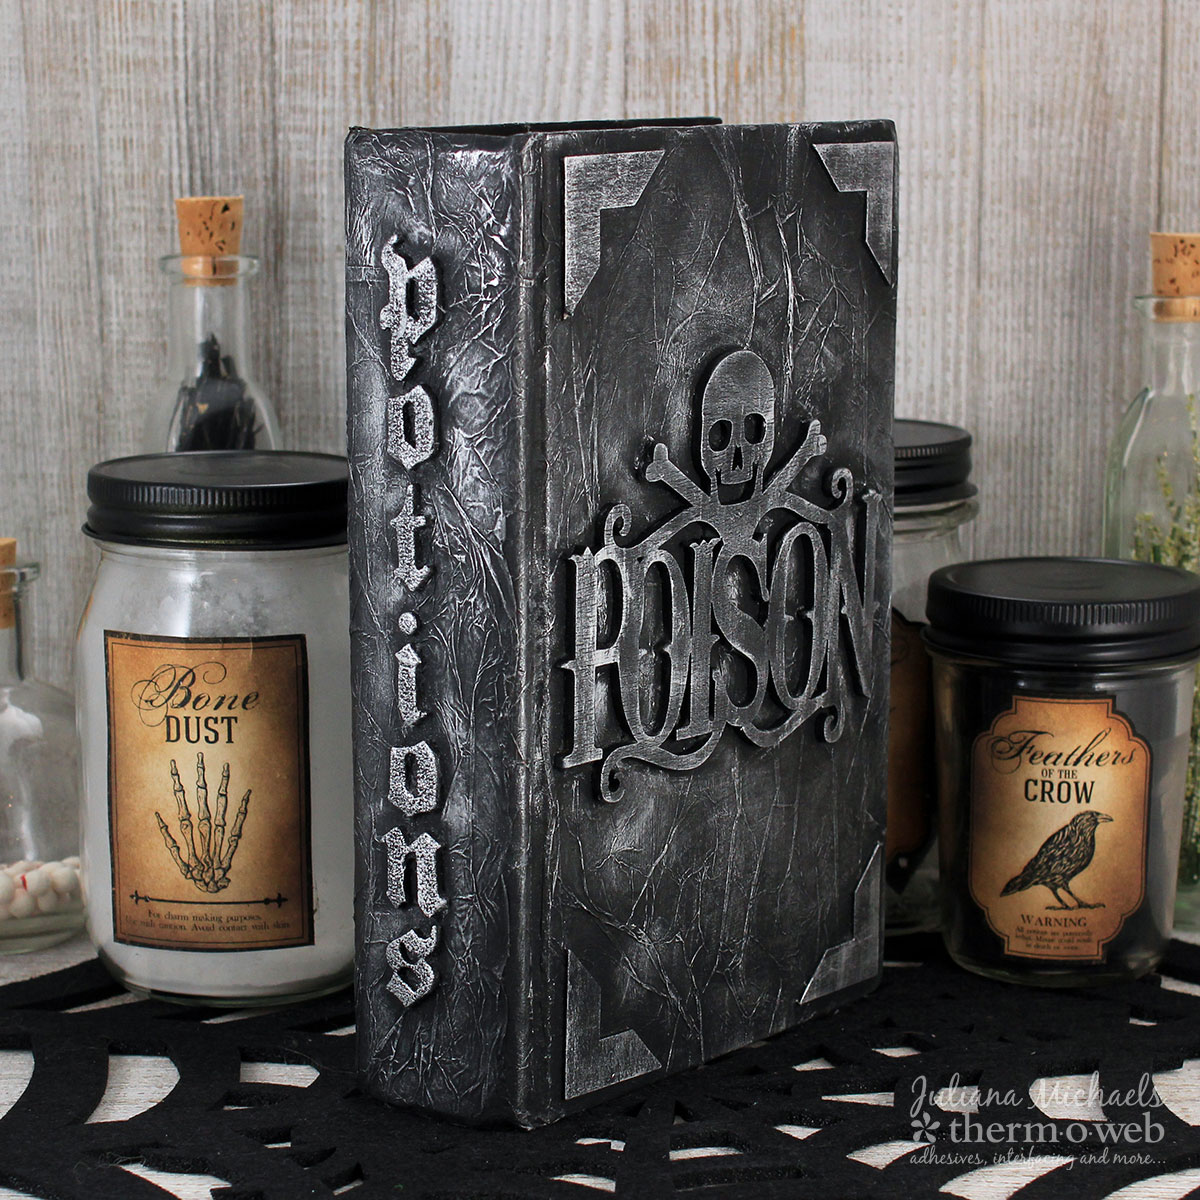 Altered Halloween Potions Book by Juliana Michaels featuring Therm O Web Mixed Media Products and Adhesives